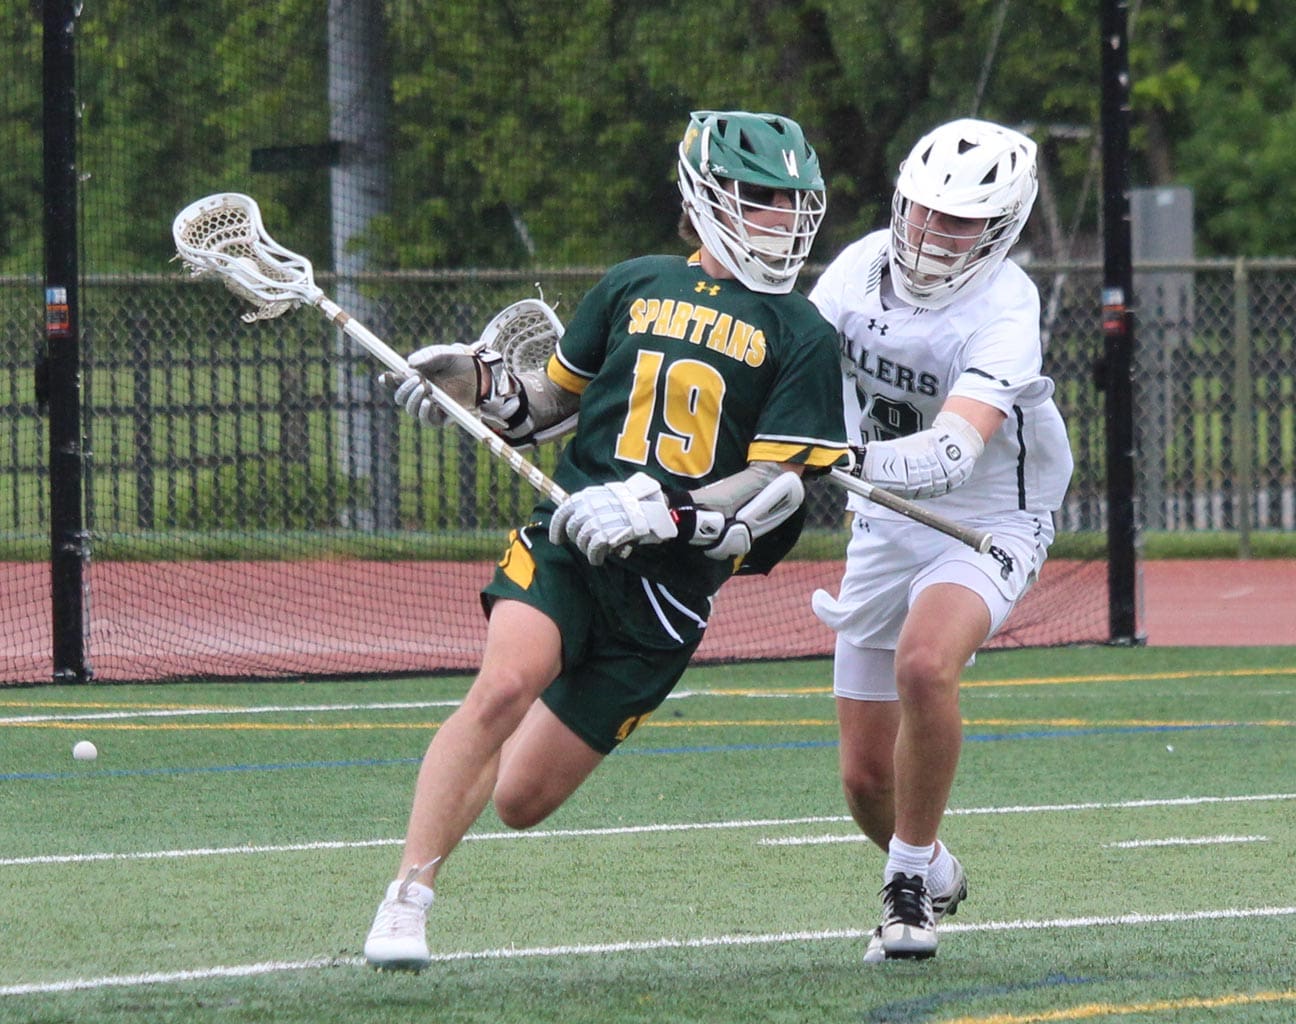 Featured image for “Quick Stick: Week 7 boys lacrosse top 10”